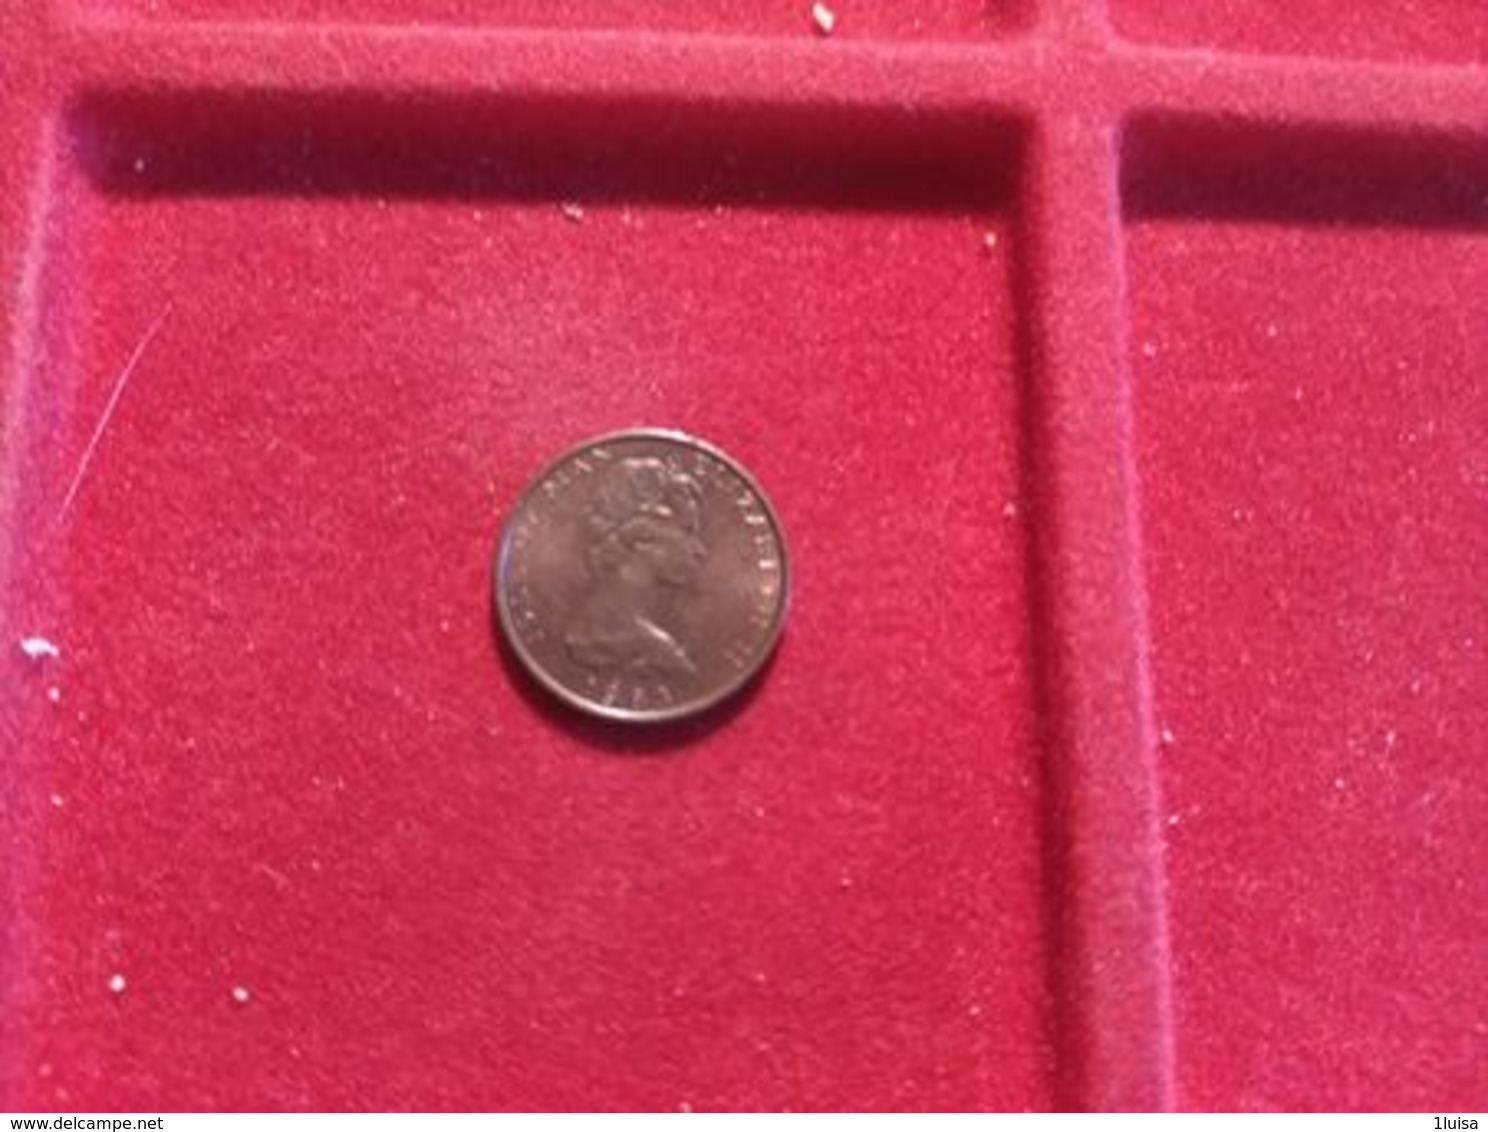 ISOLE OF MAN 1/2 PENNY 1983 - Colonie